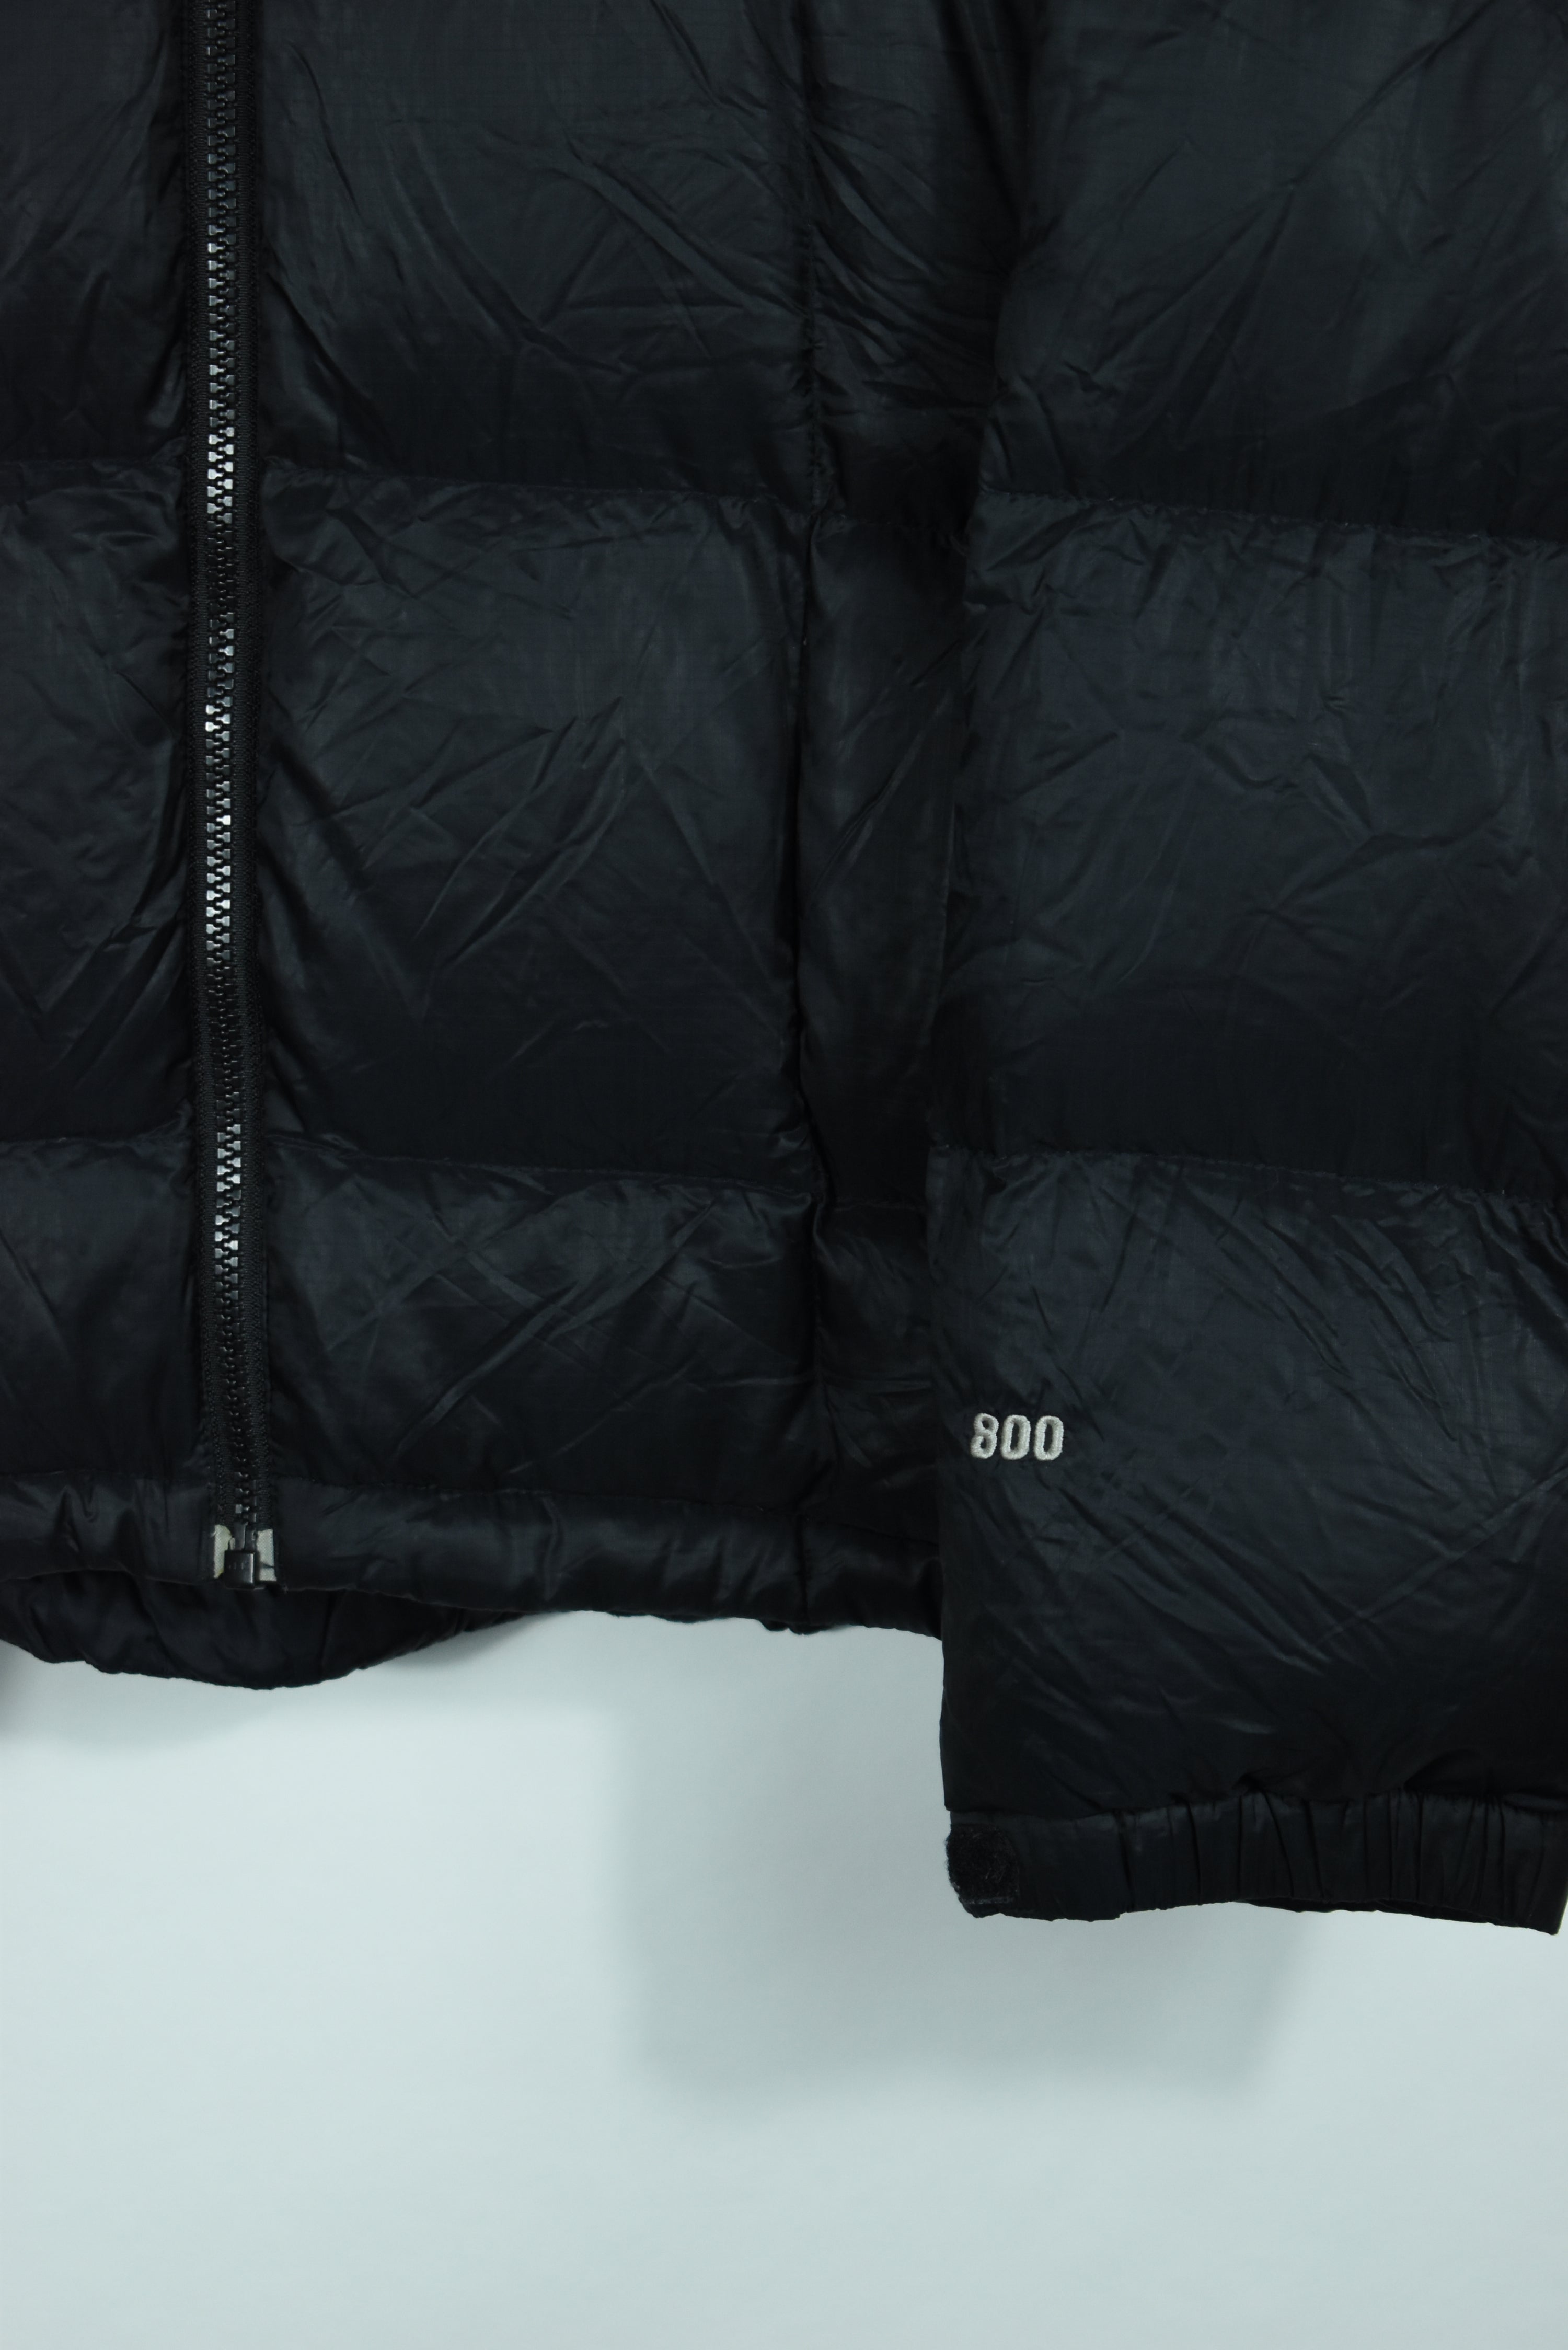 Vintage North Face Black Puffer 800 Sumit Series LARGE (Baggy)